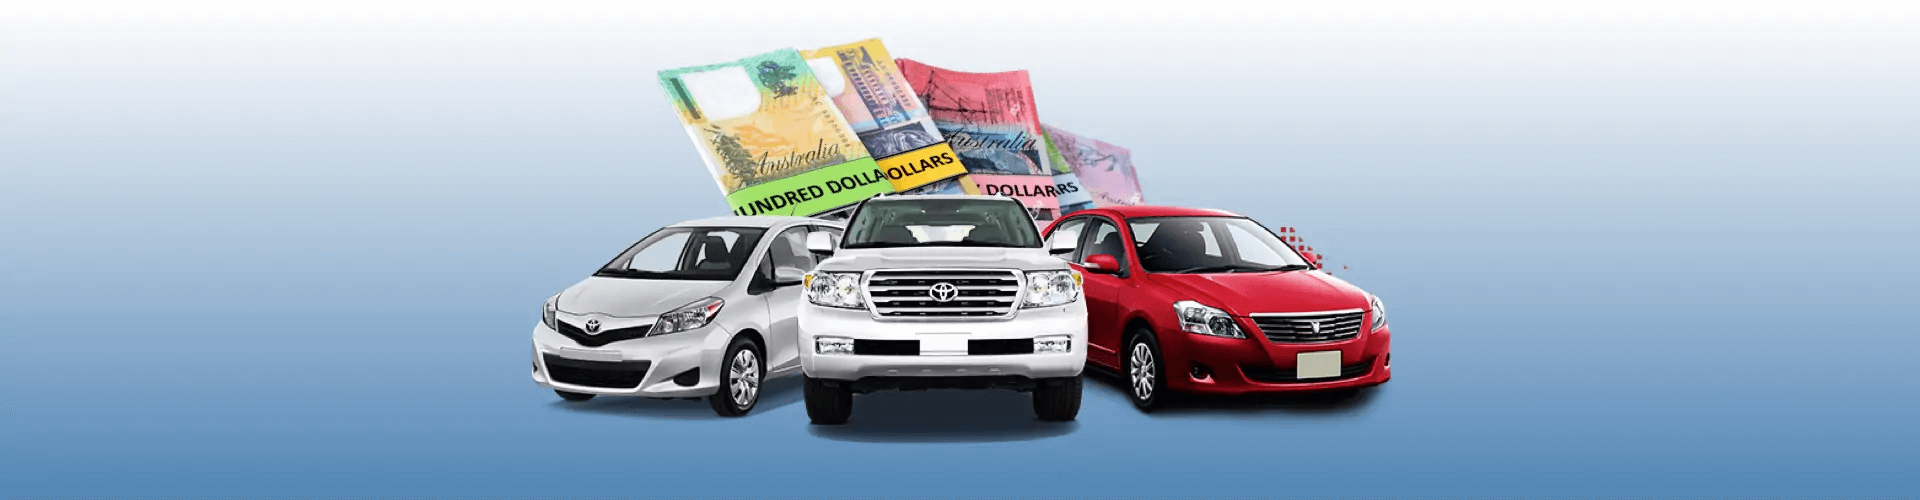 central coast cash for cars